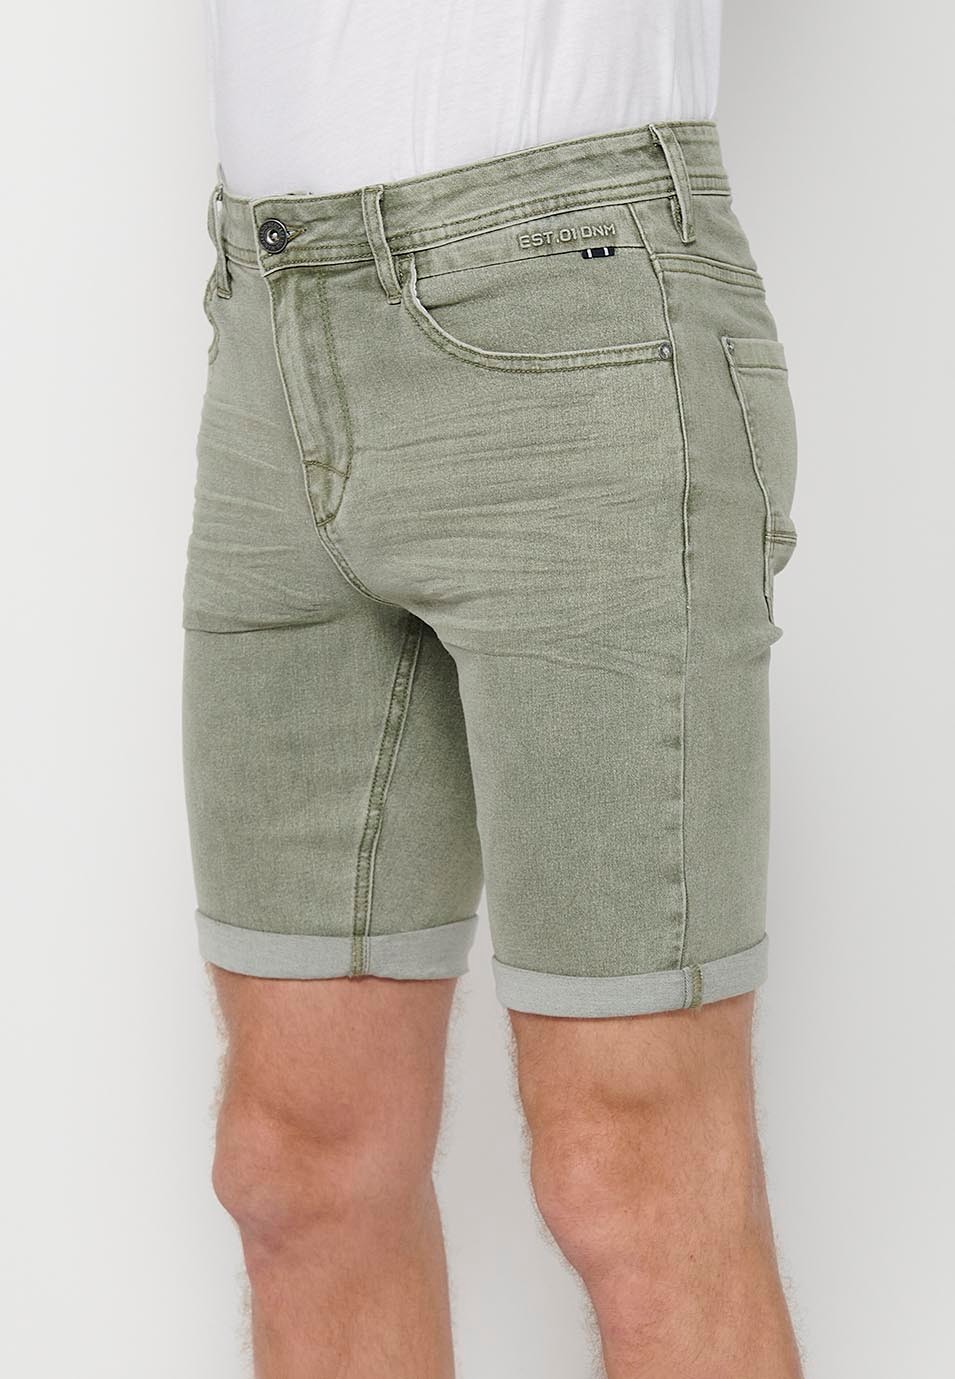 Shorts with a turn-up finish with front zipper and button closure and five pockets, one with a match pocket, in Green for Men 3